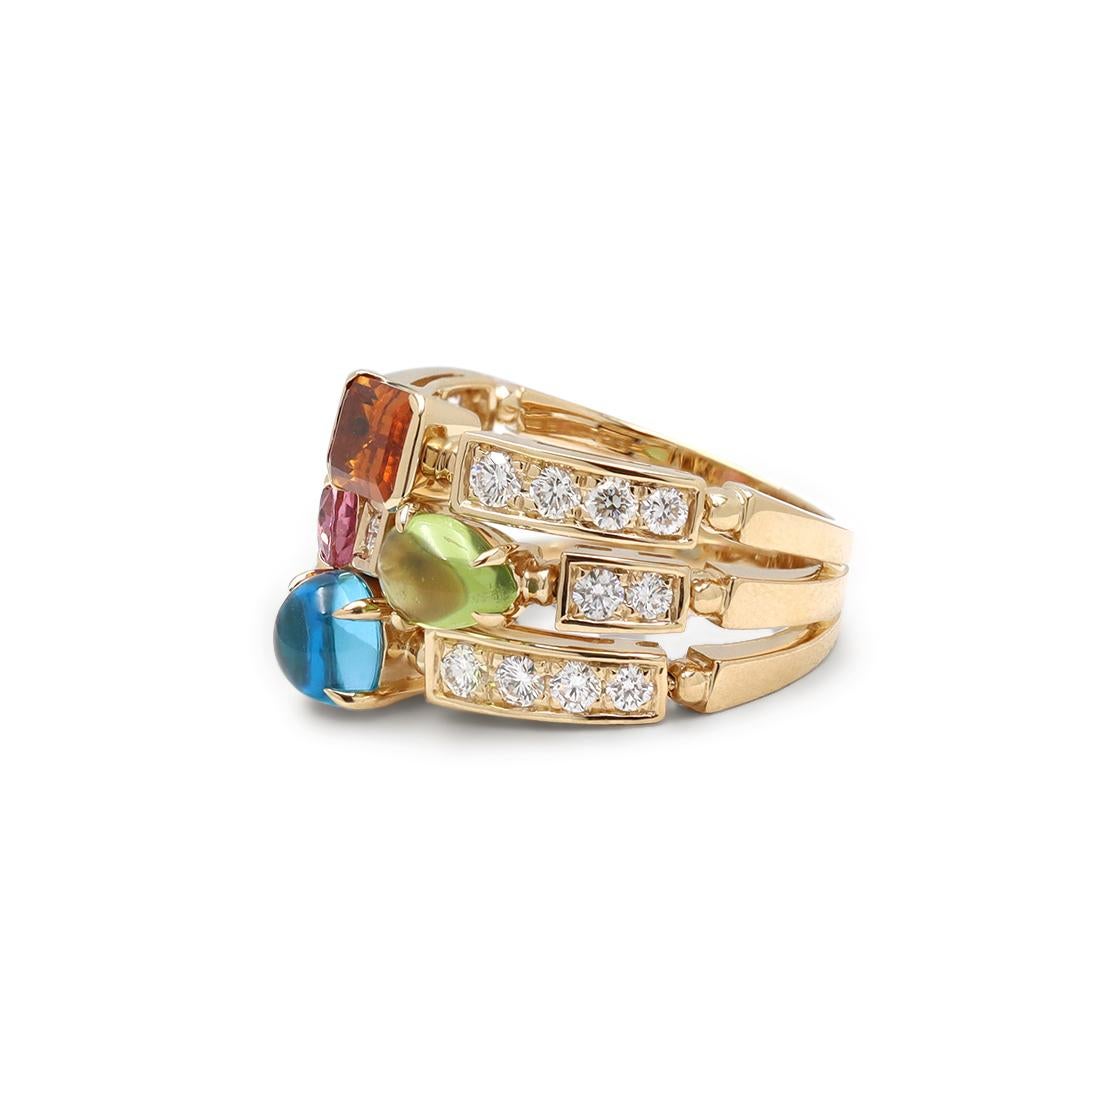 Authentic Bvlgari Allegra ring crafted in 18 karat yellow gold. The ring consists of three adjacent bands adorned with emerald cut citrine, oval-faceted pink tourmaline, pear shape peridot cabochon and cabochon blue topaz. The ring is complemented